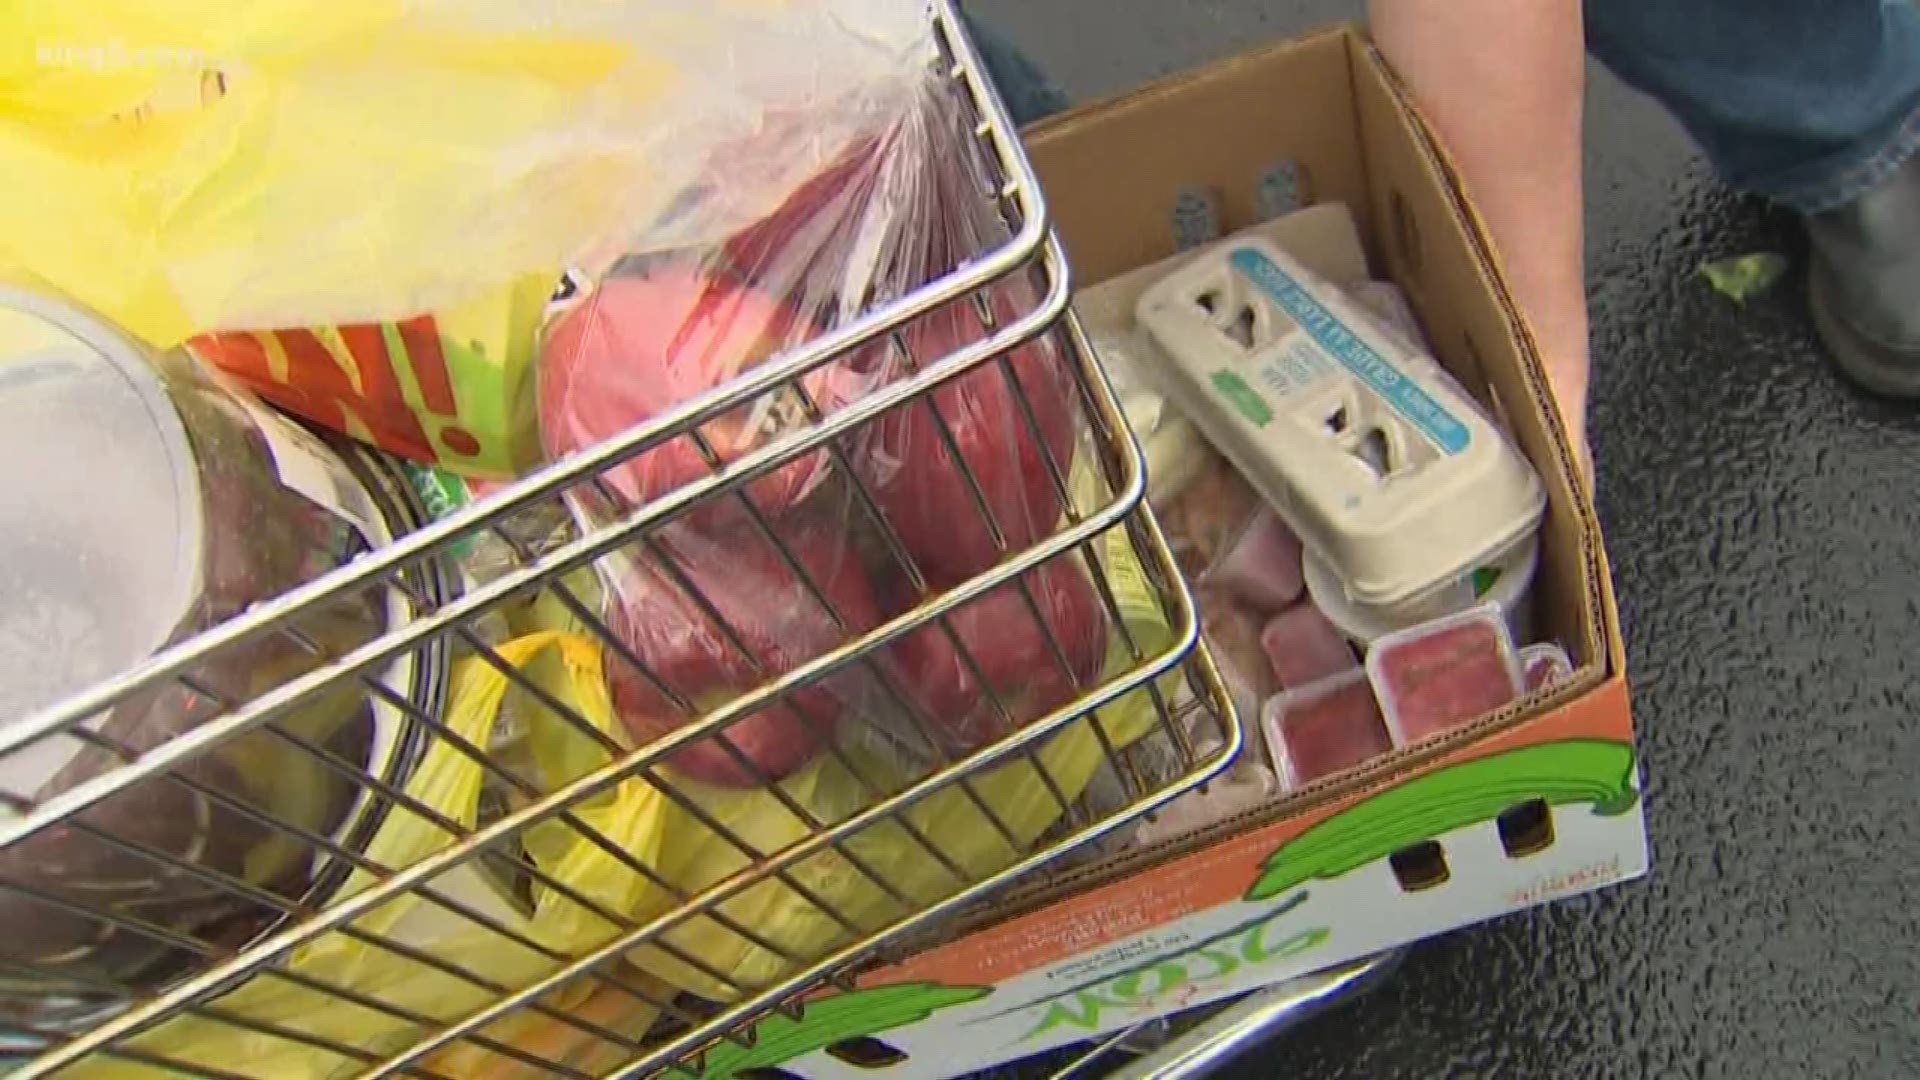 With the government shutdown dragging into its second month, unpaid workers are being forced to seek out charity. Whatcom County is being hit especially hard with hundreds of Coast Guard members, border patrol agents and airport workers feeling the squeeze. Fortunately, a lot of people are stepping up to help their neighbors in need. KING 5's Eric Wilkinson reports.